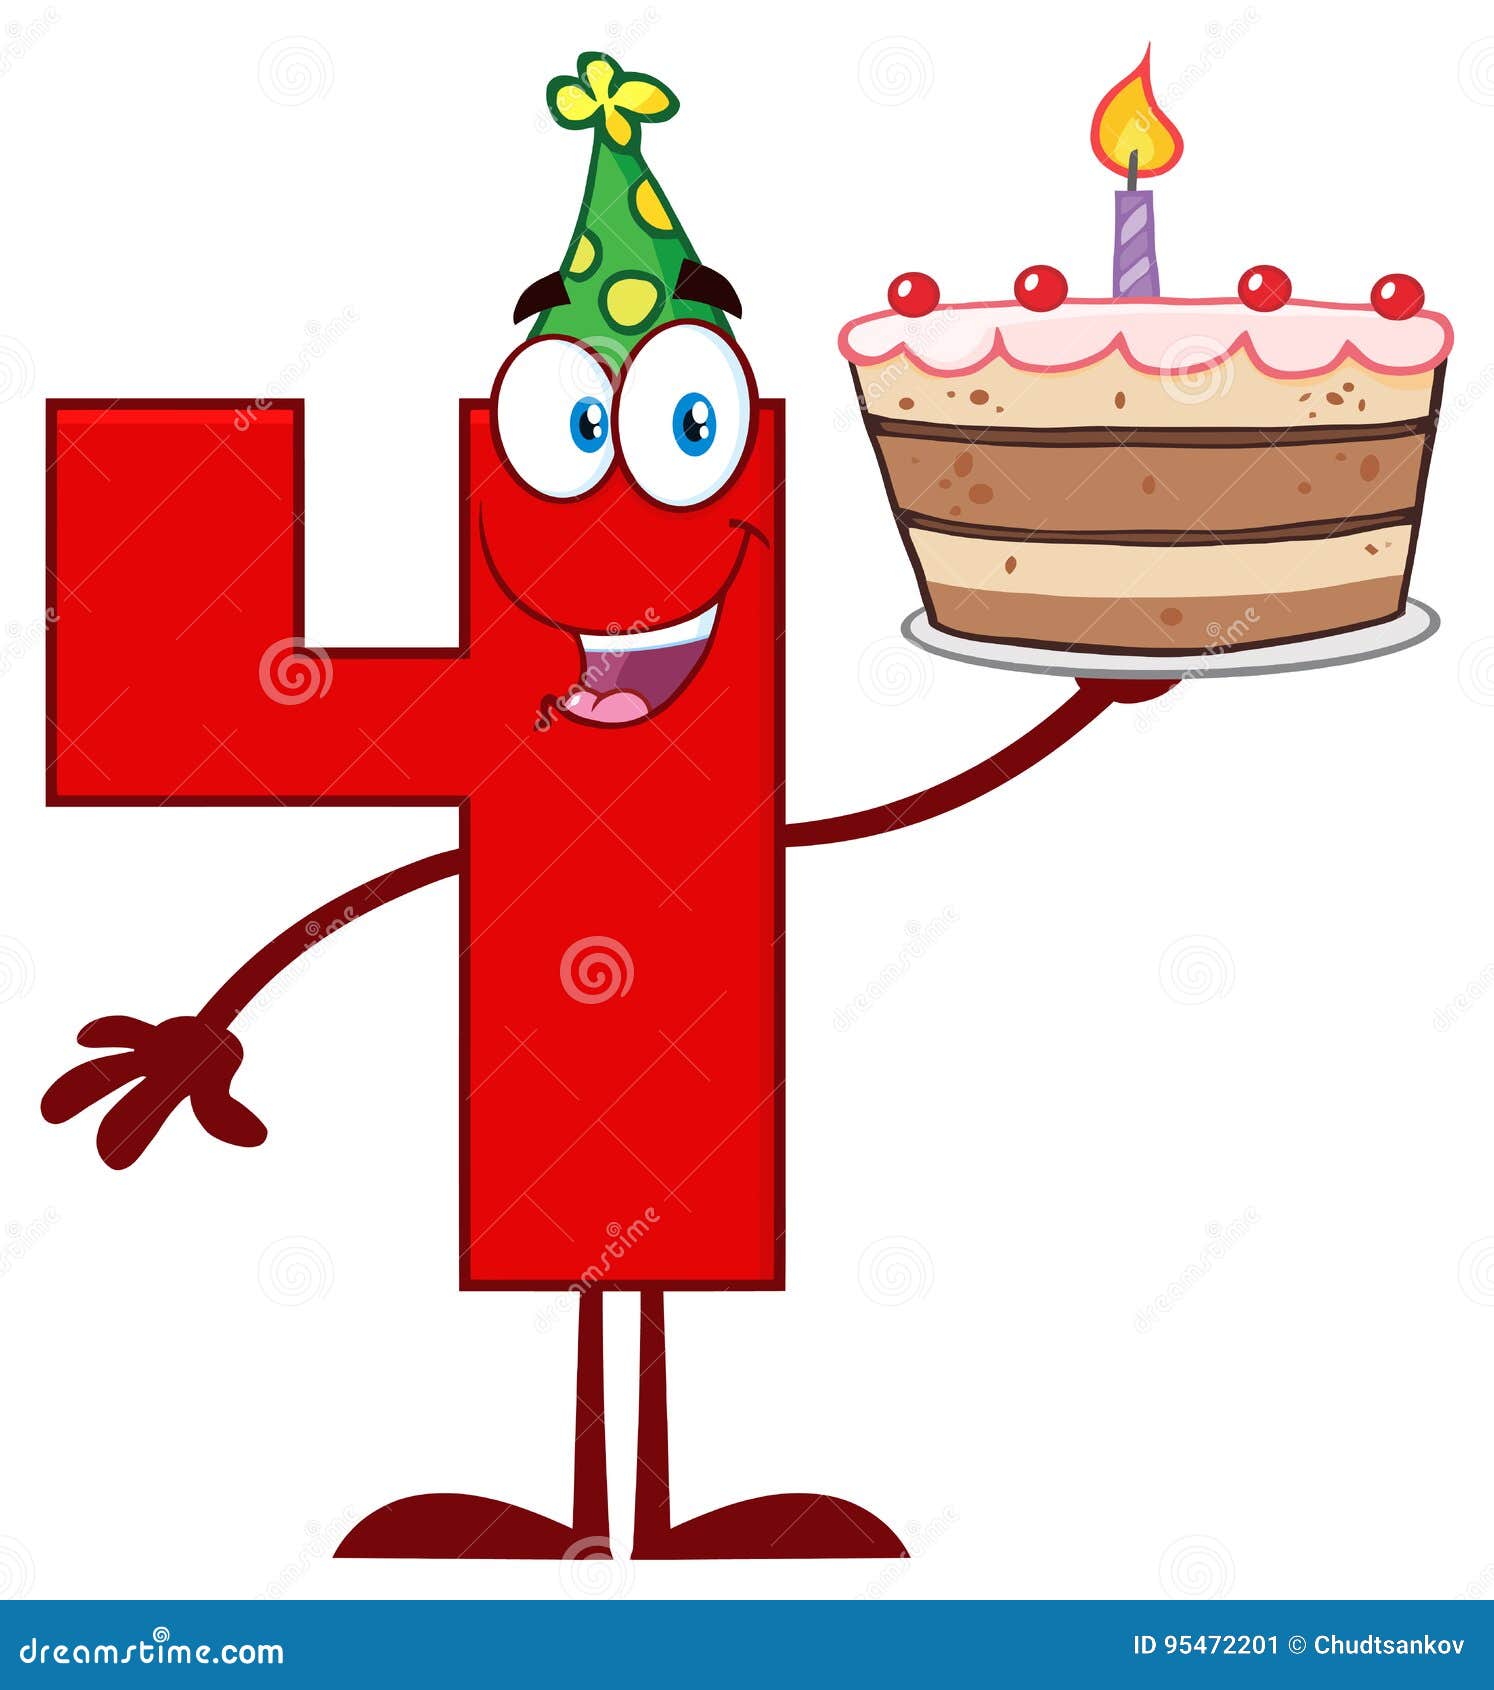 Funny Red Number Four Cartoon Mascot Character Holding Up a Birthday ...